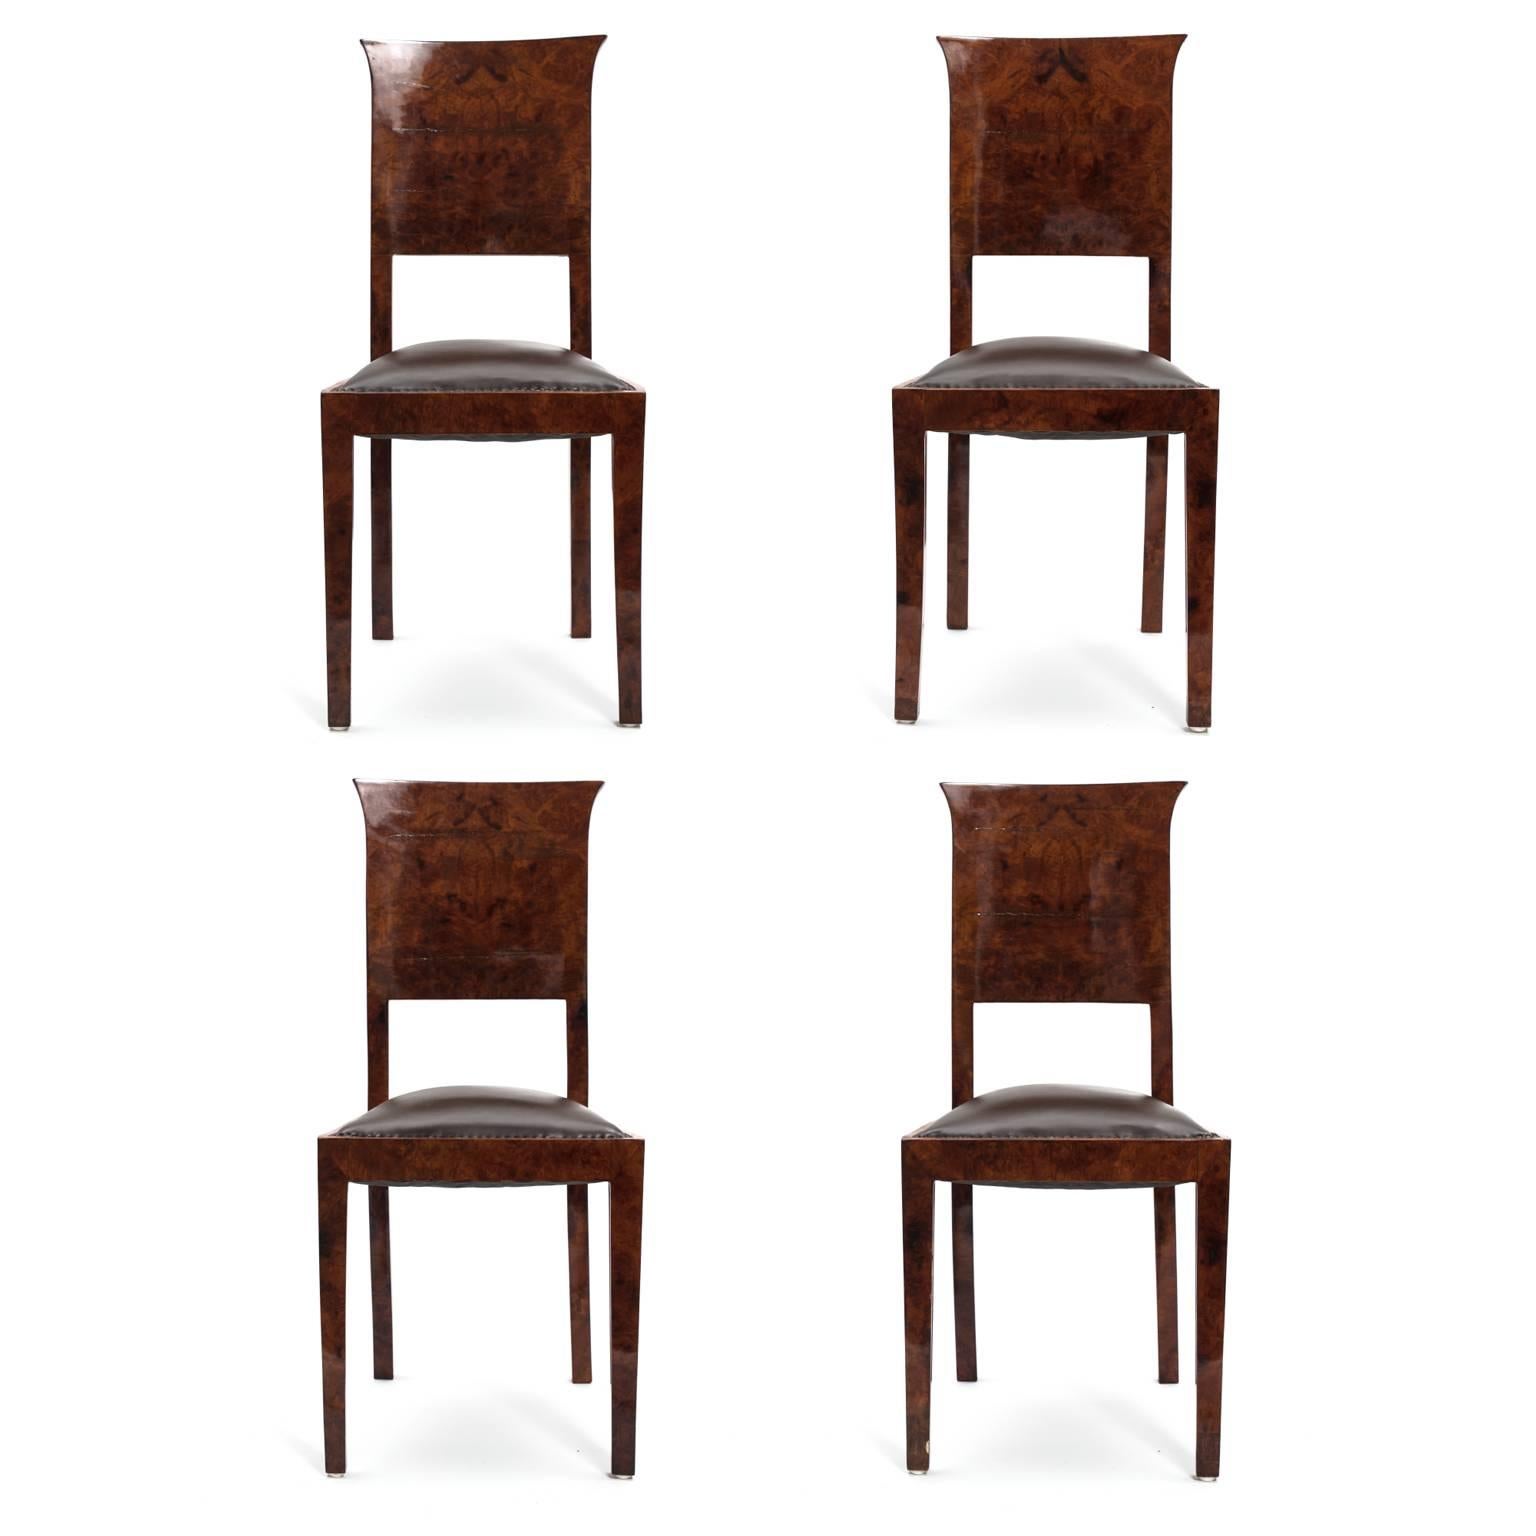 Beautifully grained, polished German burl wood with a rich, red undertone faces every part of these chairs including the legs, seat edges and backrests. The carved seat backs flare out at the top in a slight curve, characteristic of the Art Deco